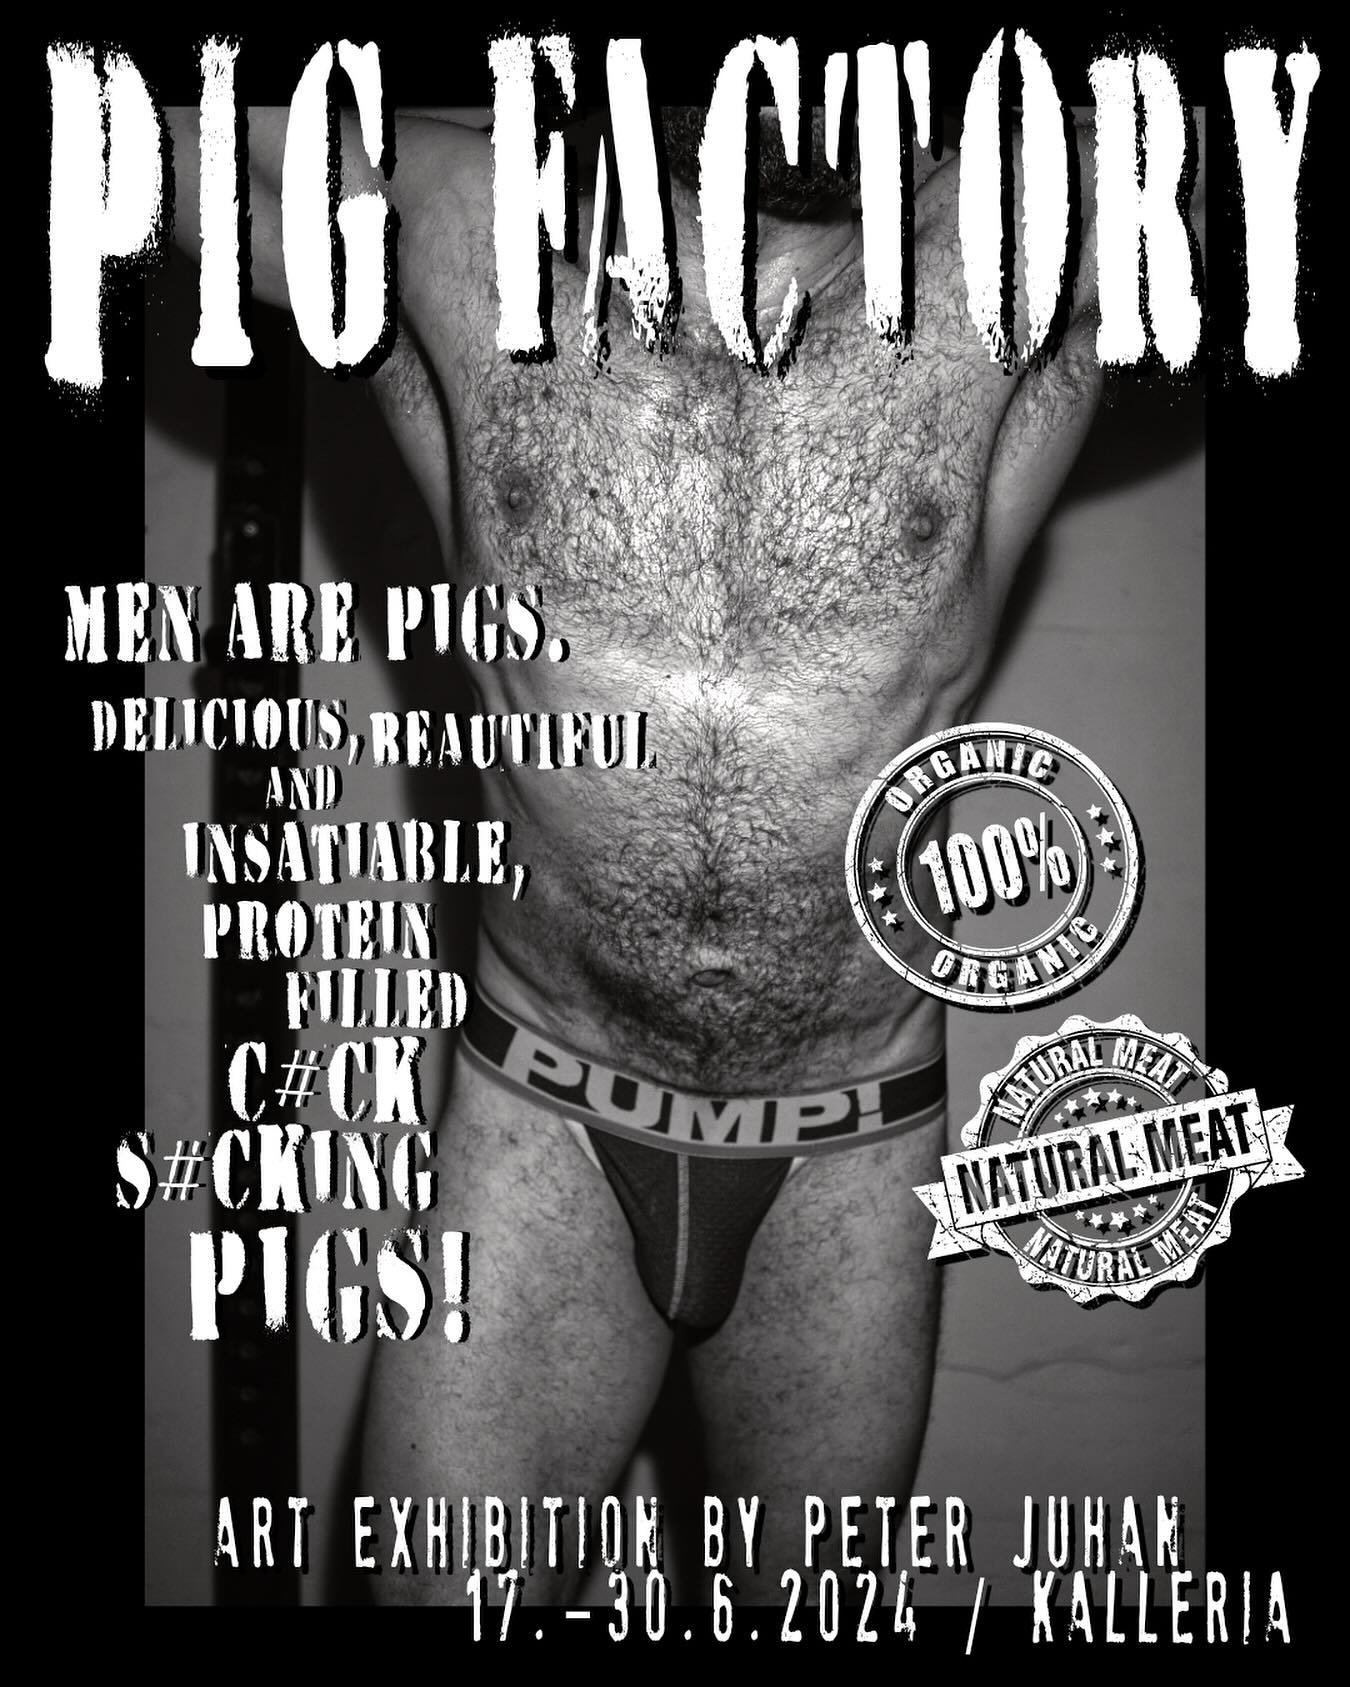 IT&rsquo;S TIME! PIGGY PIGGY PIGGY?🐷🤤

MEN ARE PIGS. DELICIOUS, BEAUTIFUL AND INSATIABLE, PROTEIN FILLED C*CK S*CKING PIGS!
☑️ 100% ORGANIC!
☑️ NATURAL MEAT!

&lt; PIG FACTORY &gt;
My Third Fetish Art Exhibition
17. - 30.6.2024
@galleriakalleria (K